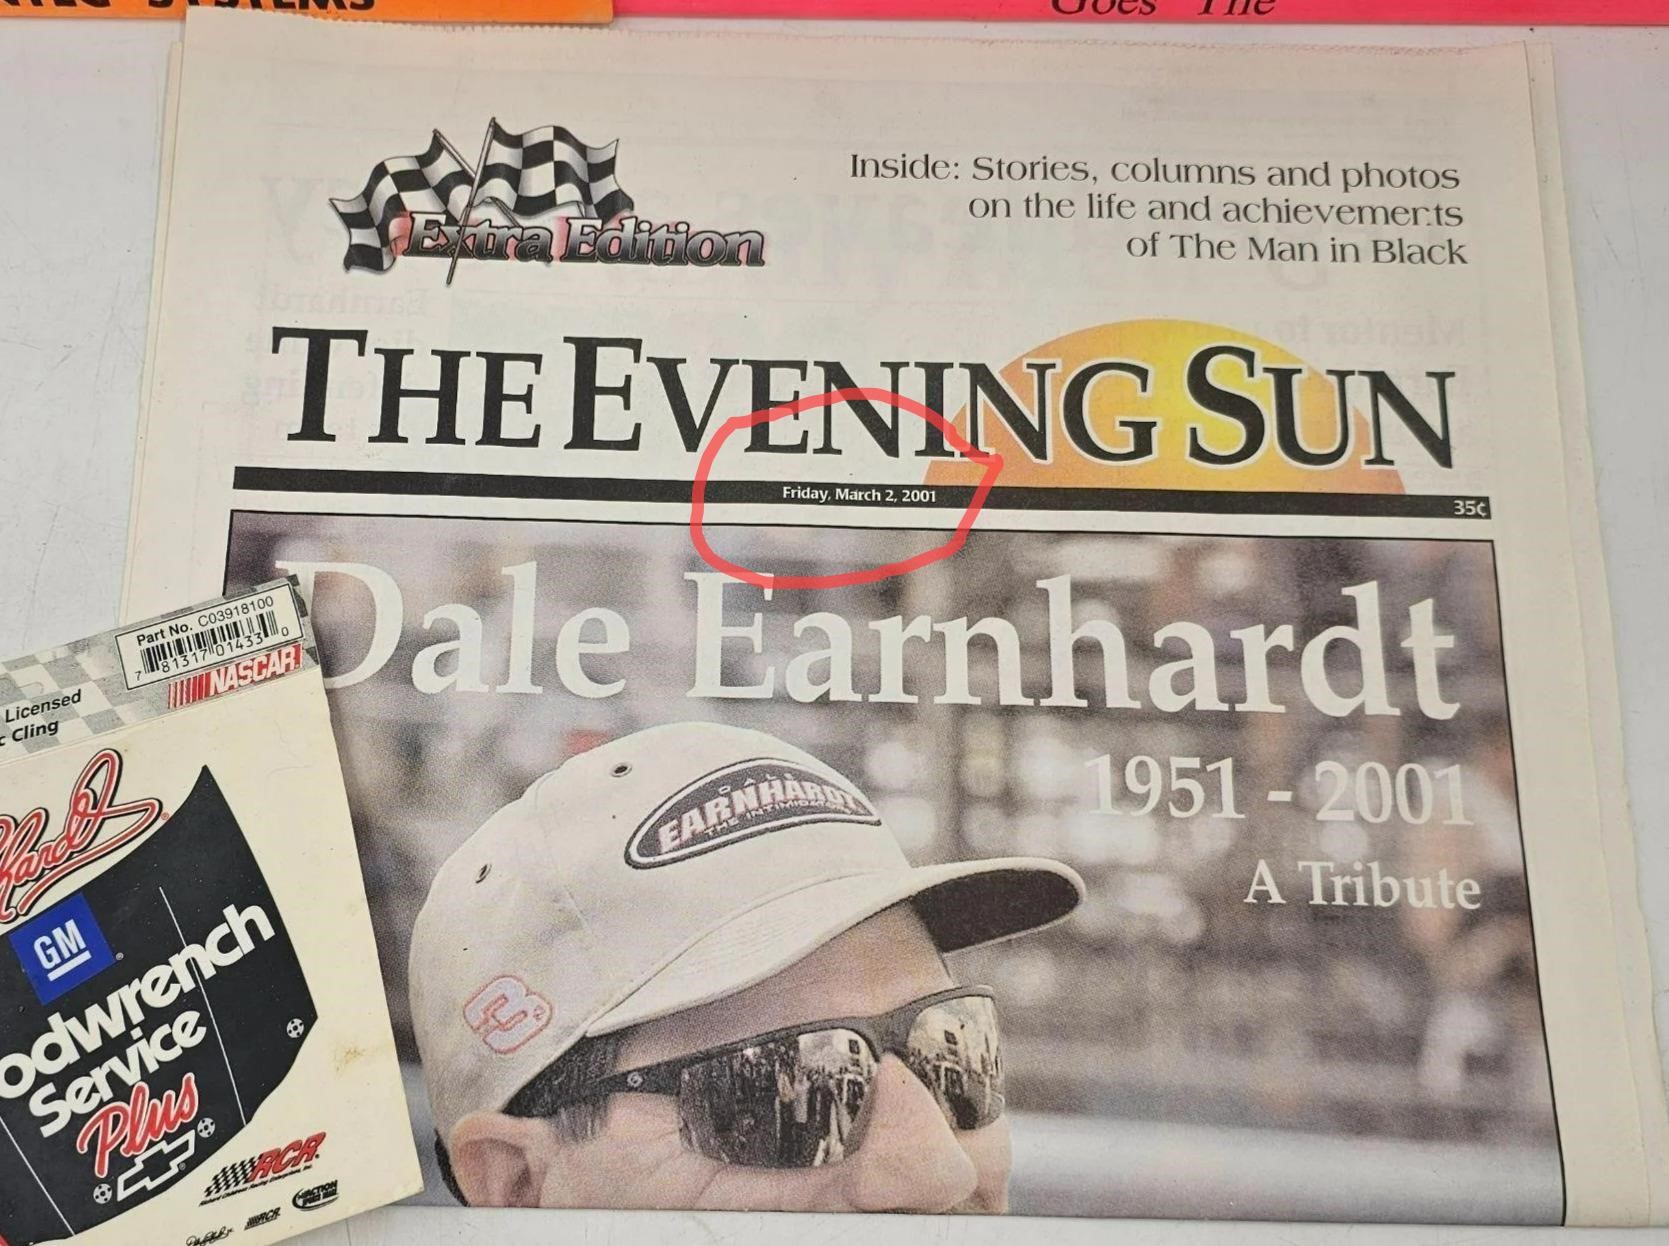 Dale Earnhardt Sr Newspaper dated 7 days before